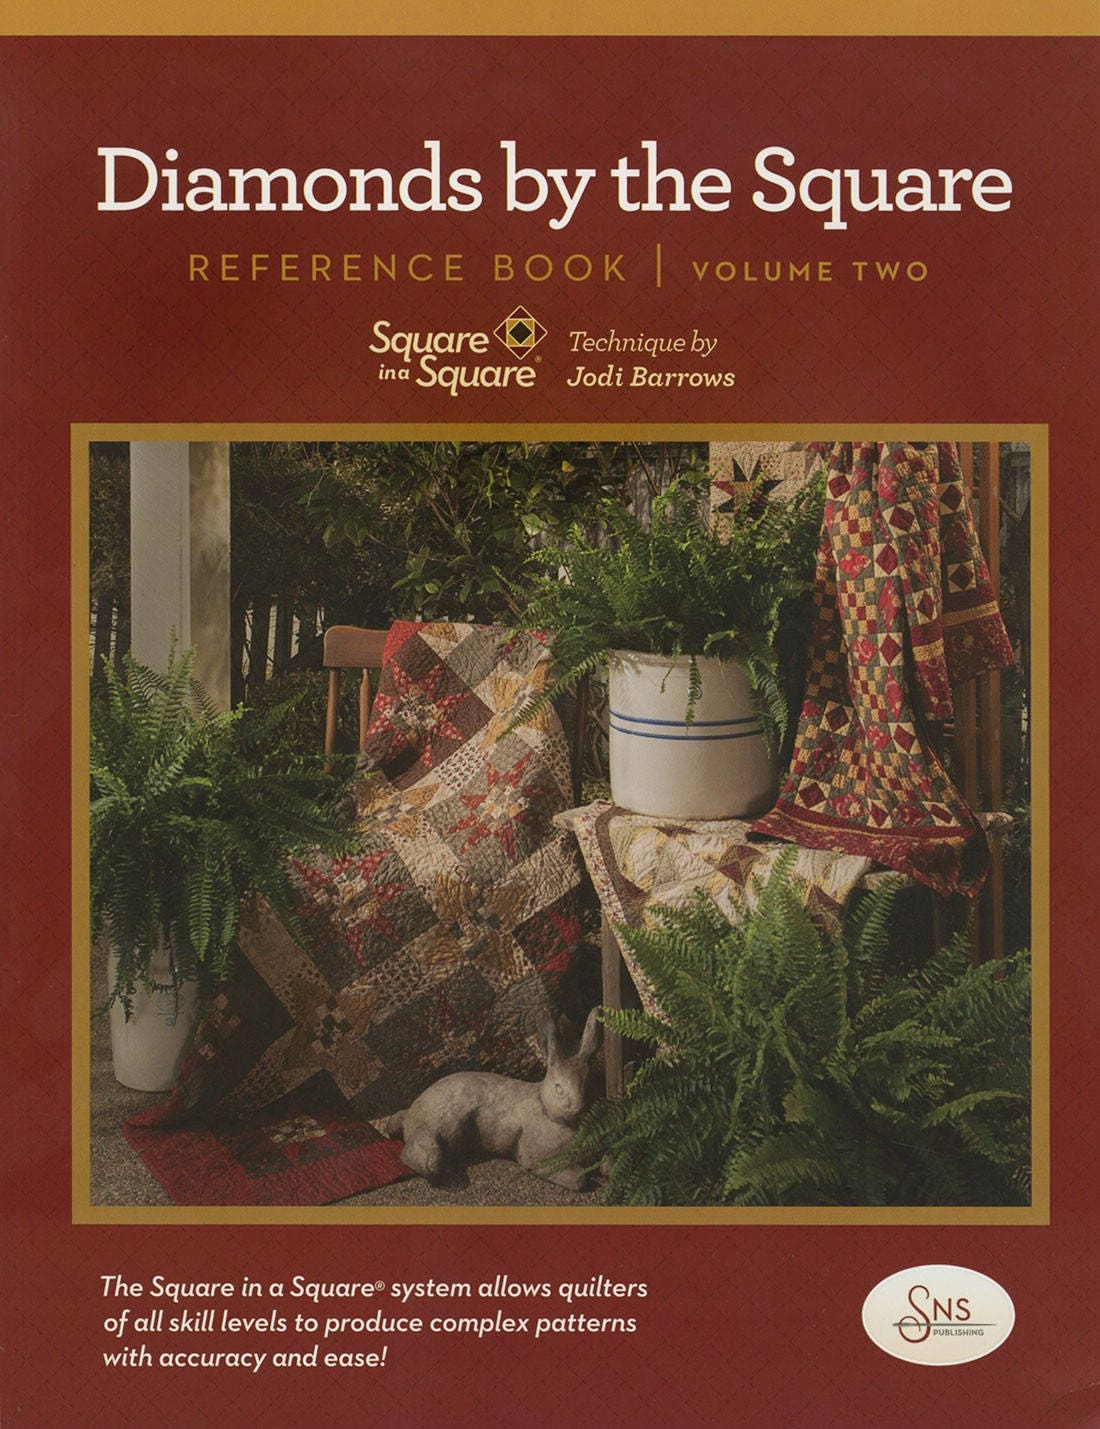 Diamonds By The Square Quilt Reference Book by Jodi Barrows for Square in a Square